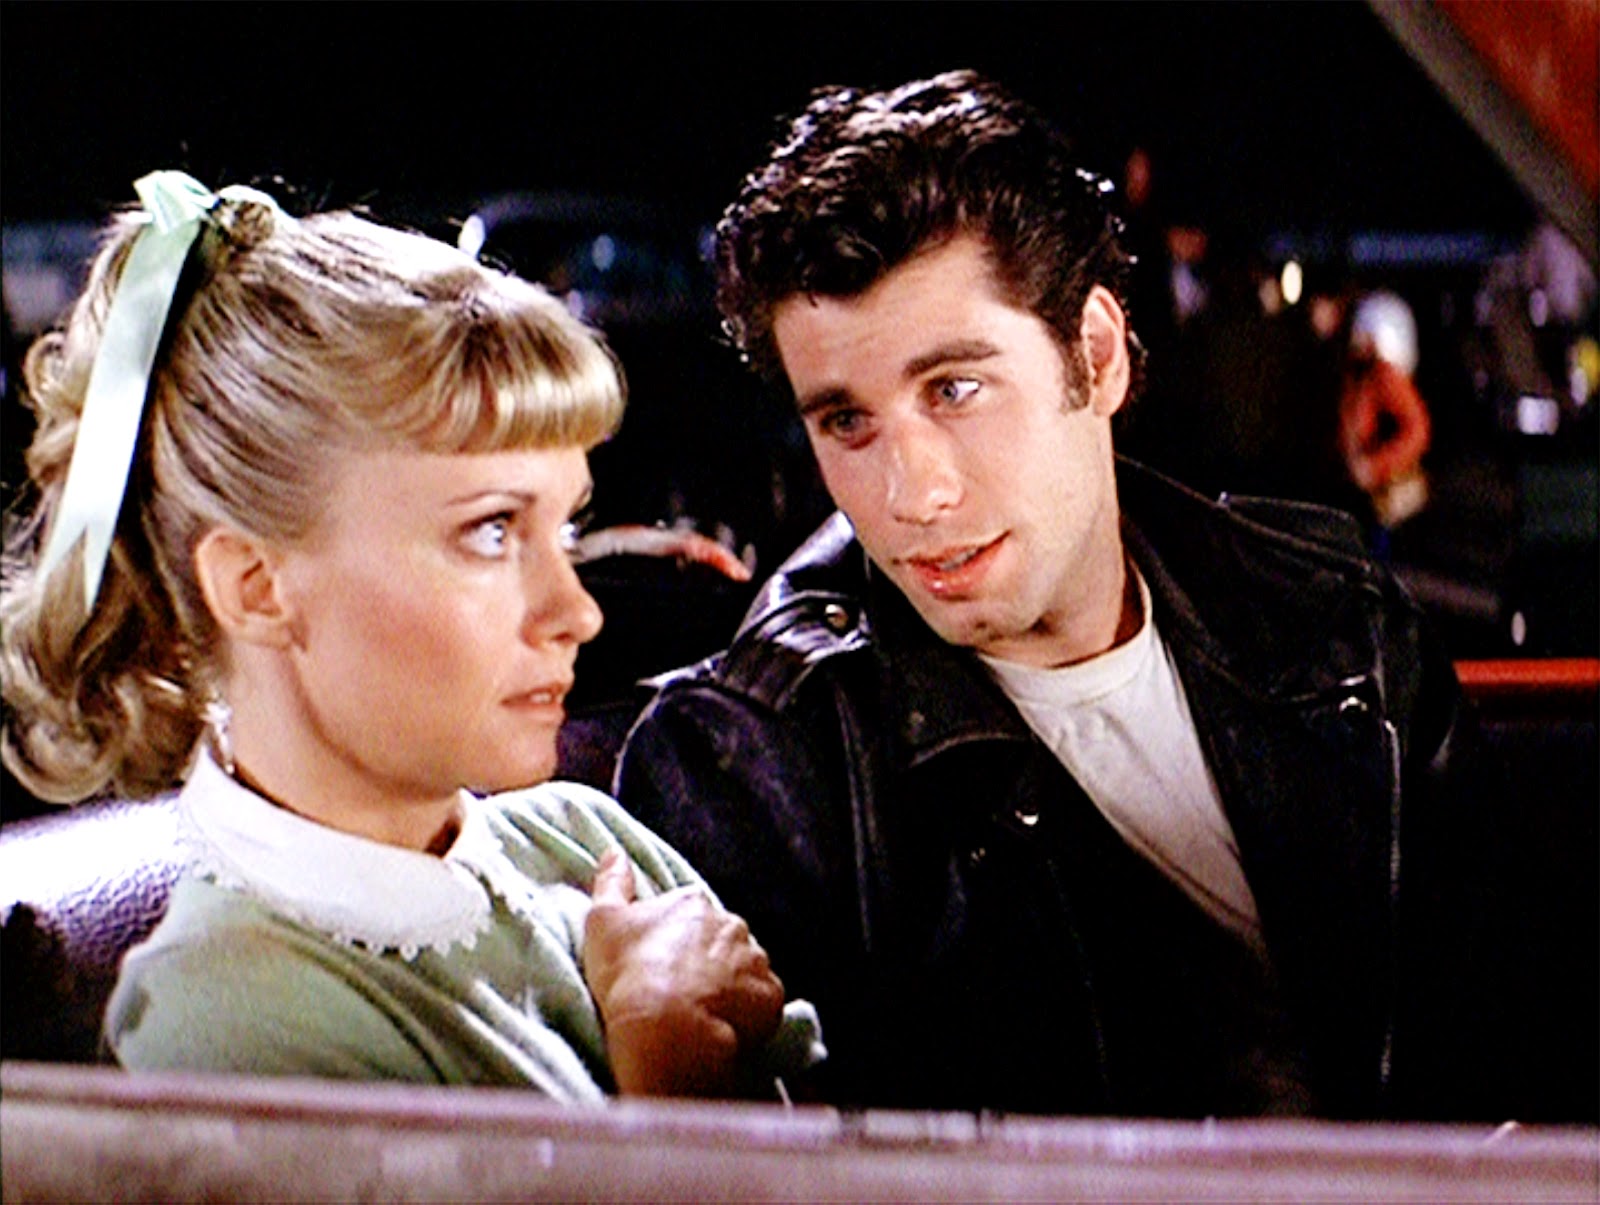 grease1